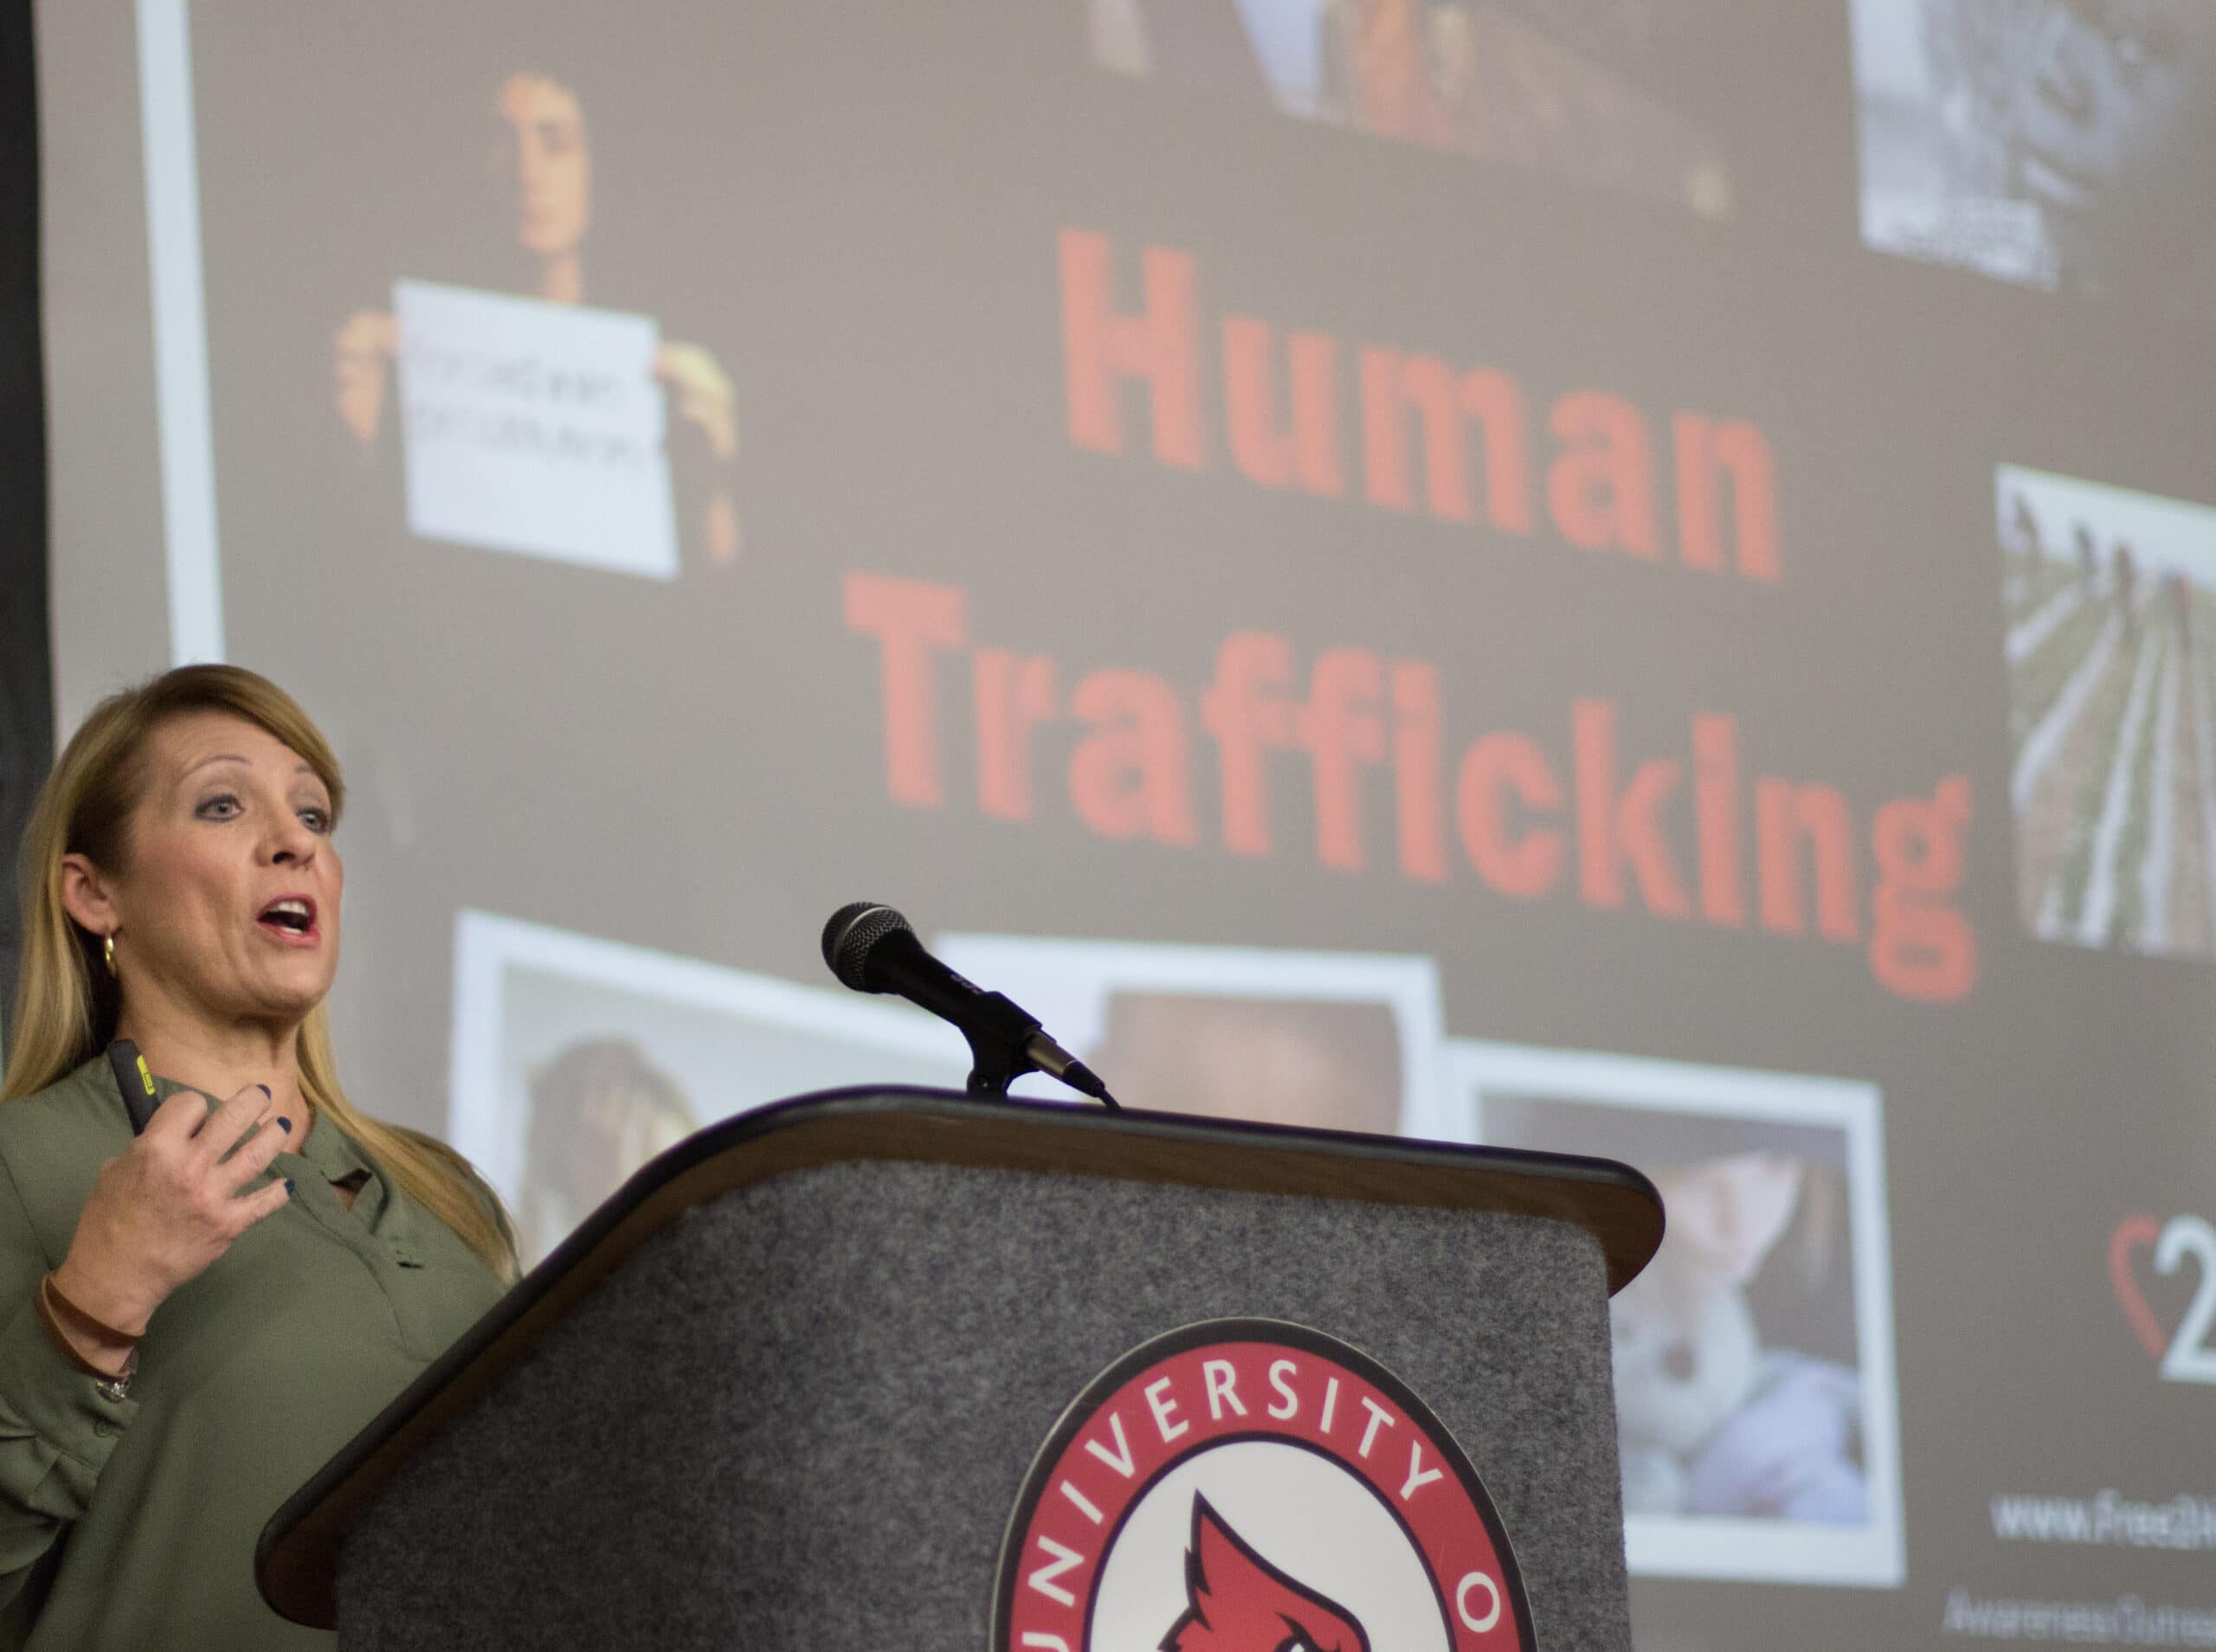 Human trafficking conference aims to raise awareness • The Louisville